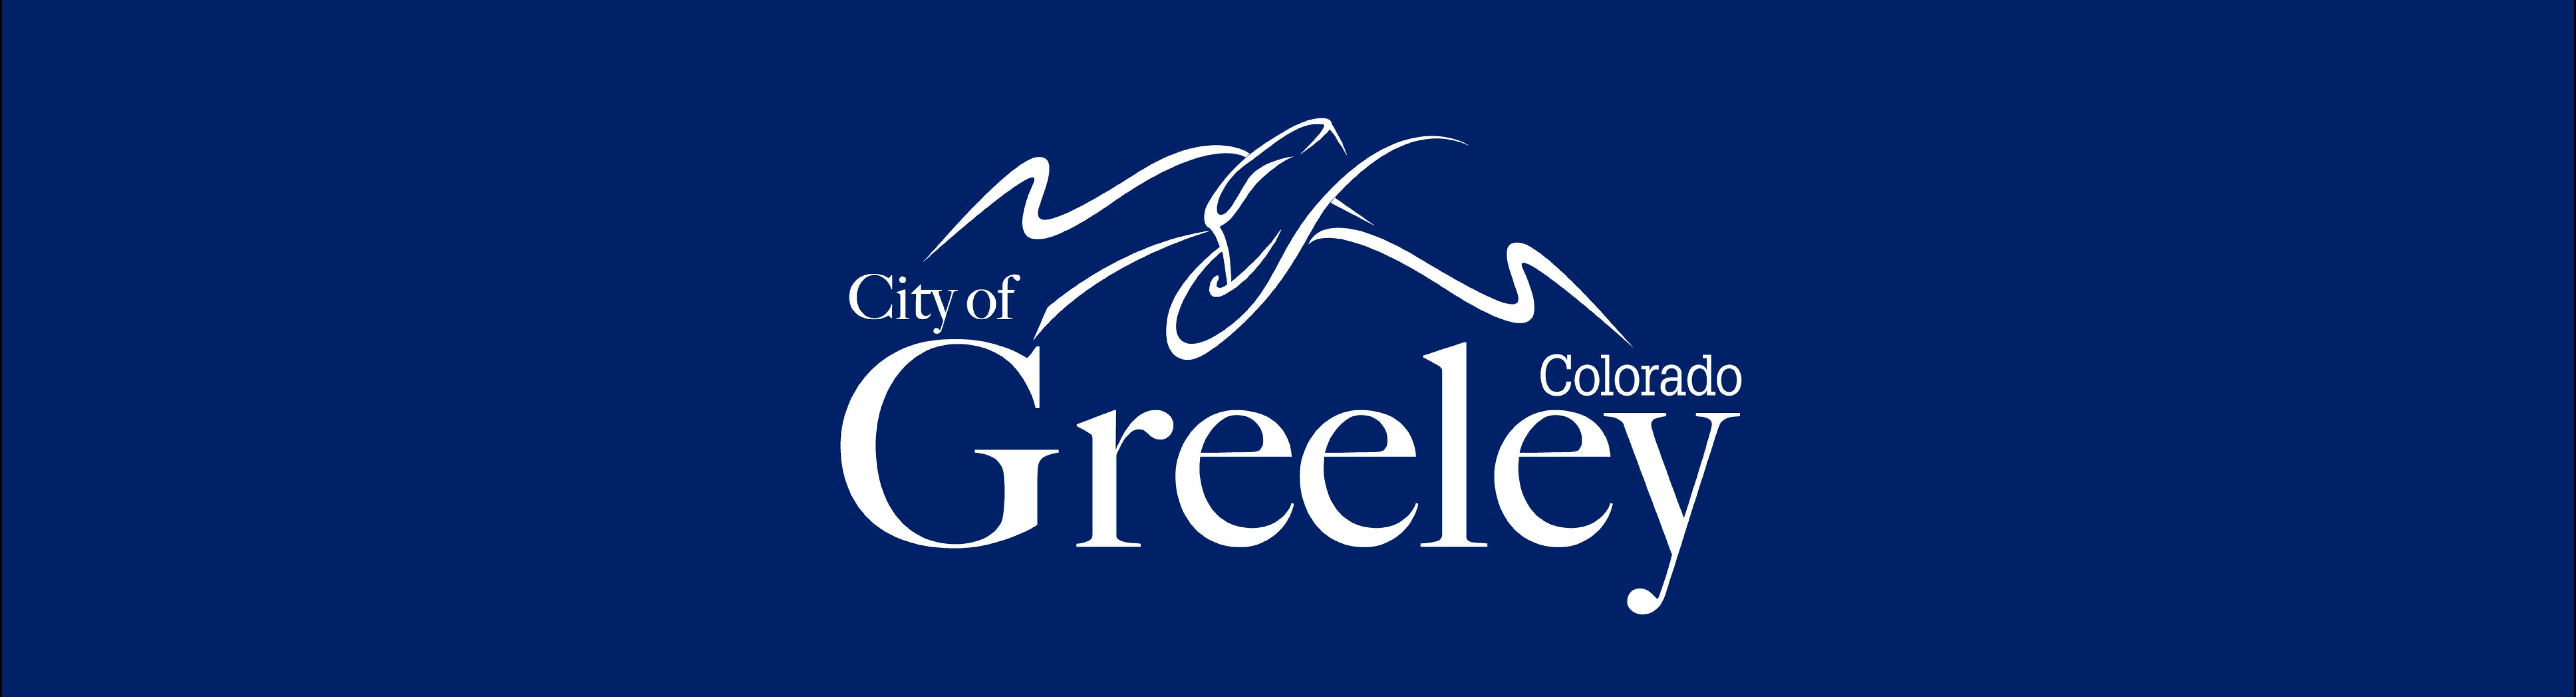 The City of Greeley logo